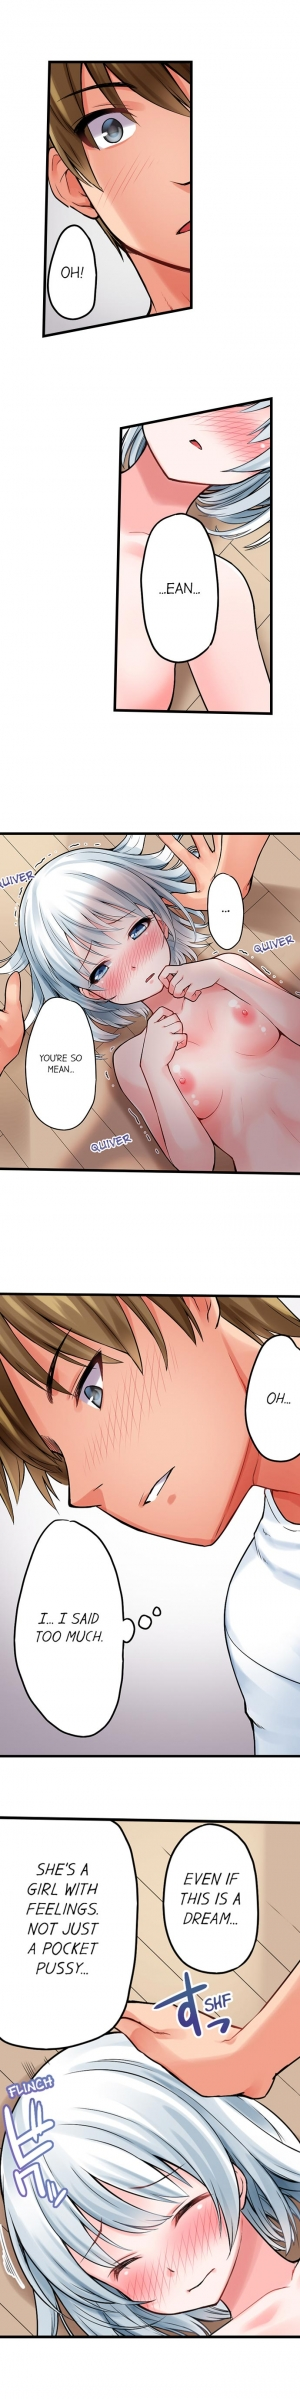 [Kintarou] The Descent to Earth of The Great Pussy Virgin Ch. 1-6 (Ongoing) [English] - Page 18